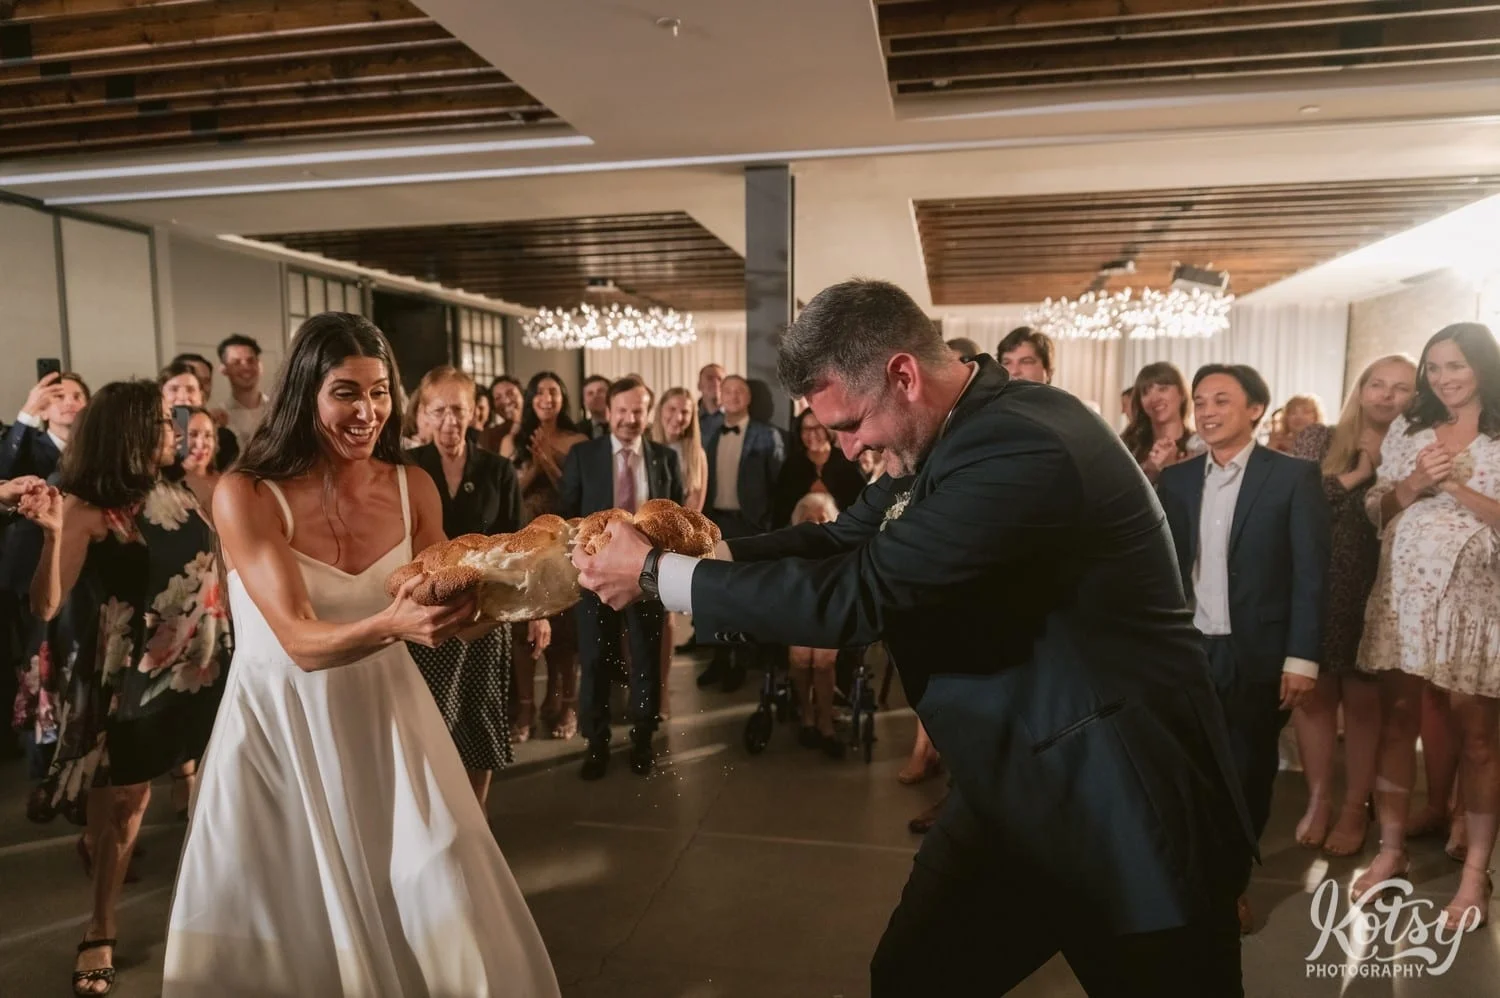 A bride and groom tug on a large loaf of bread during the Macedonian breaking of the bread ceremony during a Village Loft wedding reception in Toronto, Canada